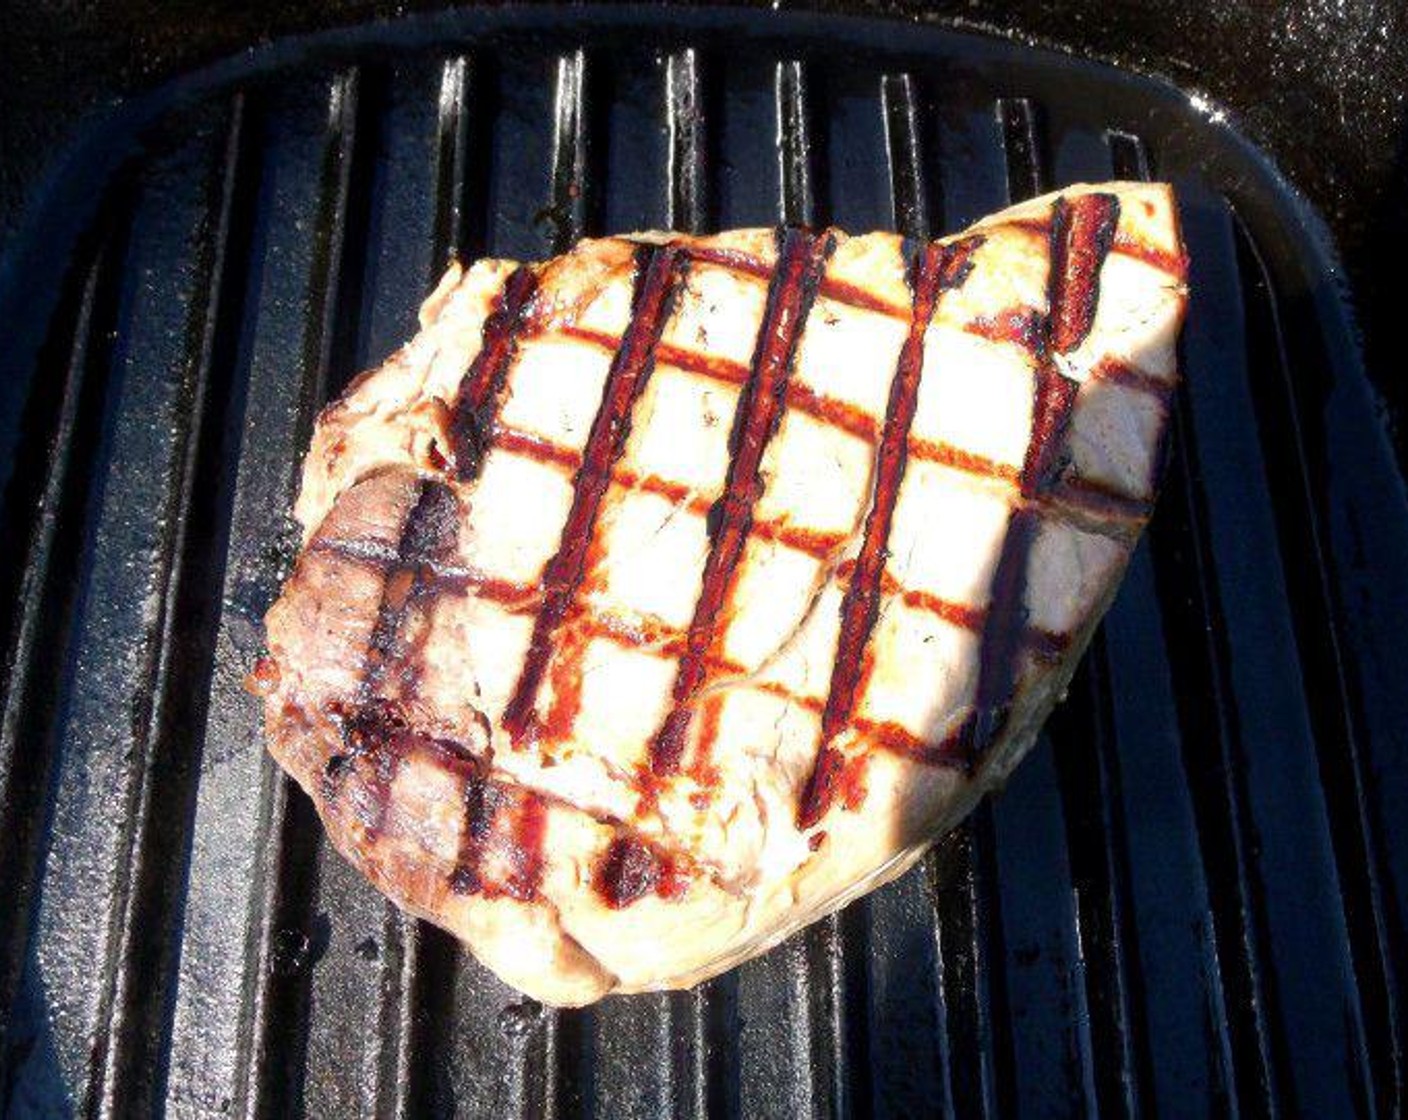 step 2 Grill to desired doneness. When done, brush generously with Hoisin Sauce (to taste) and broil until caramelized.